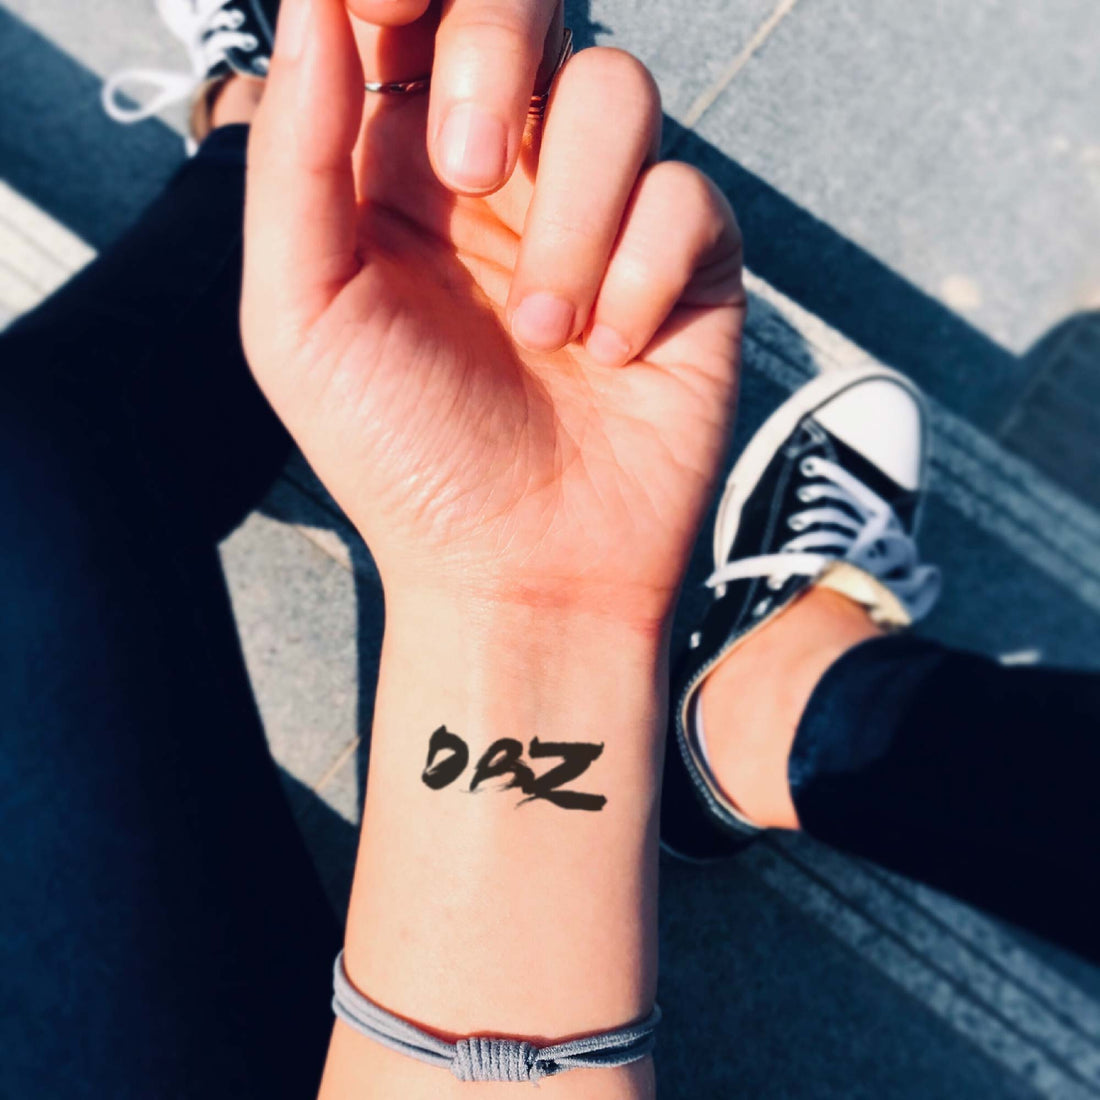 DBZ Dragon Ball Z custom temporary tattoo sticker design idea inspiration meanings removal arm wrist hand words font name signature calligraphy lyrics tour concert outfits merch accessory gift souvenir costumes wear dress up code